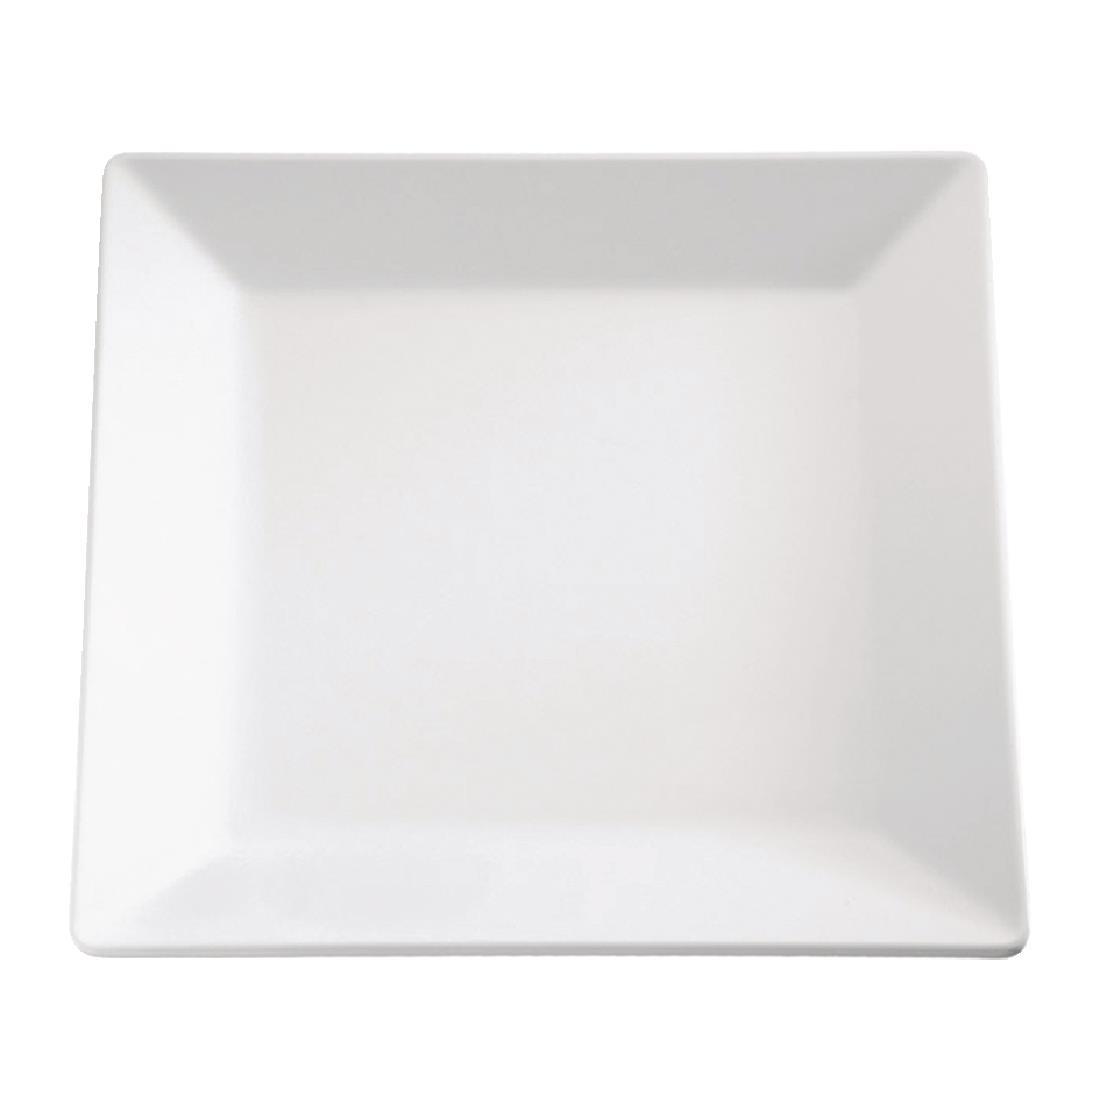 APS Pure Melamine Square Tray 10in - Each - GF172 - 1